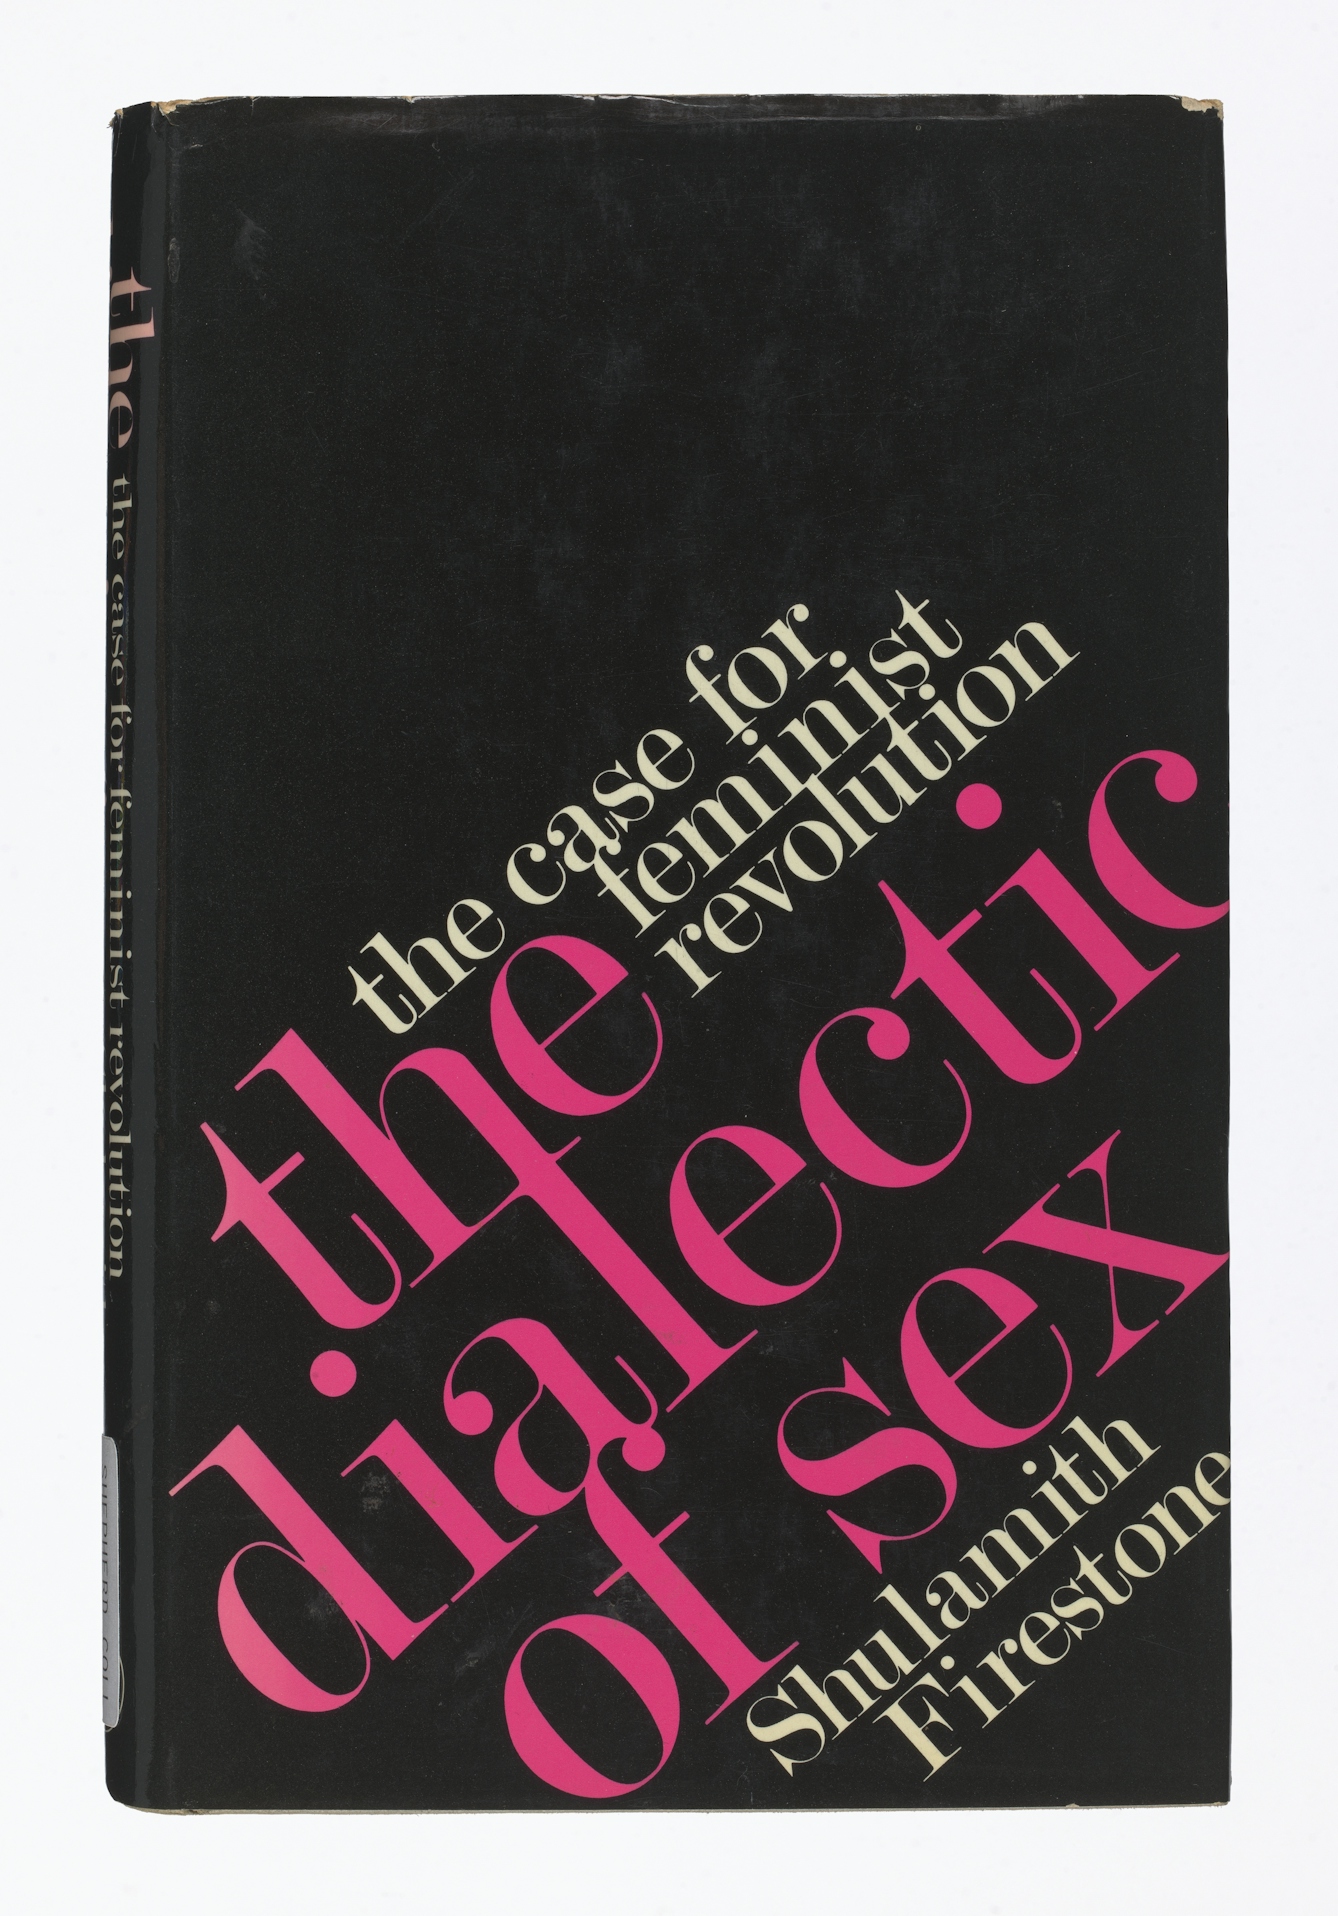 Photograph of the front cover of a book. The cover is black with the title written at a 45degree angle in pink and cream text. The title reads, "The dialectic of sex : the case for feminist revolution, Shulamith Firestone".